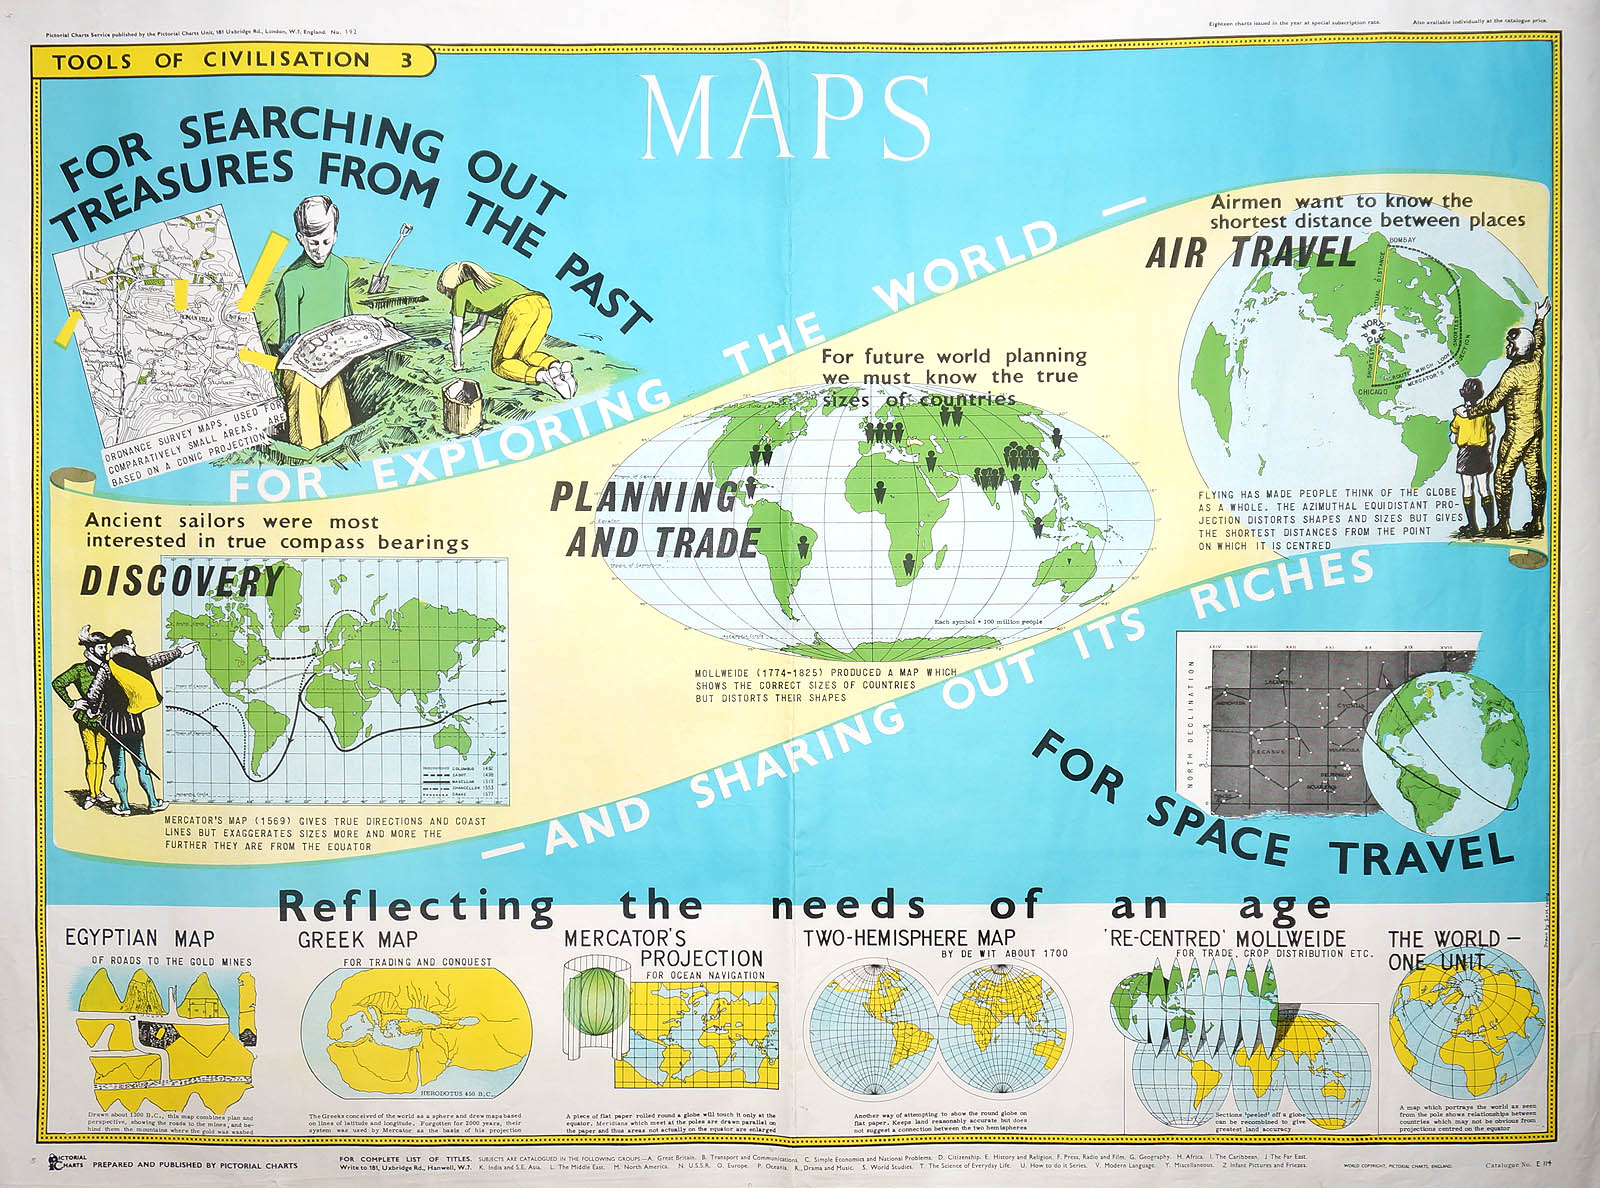 (Thematic) MAPS